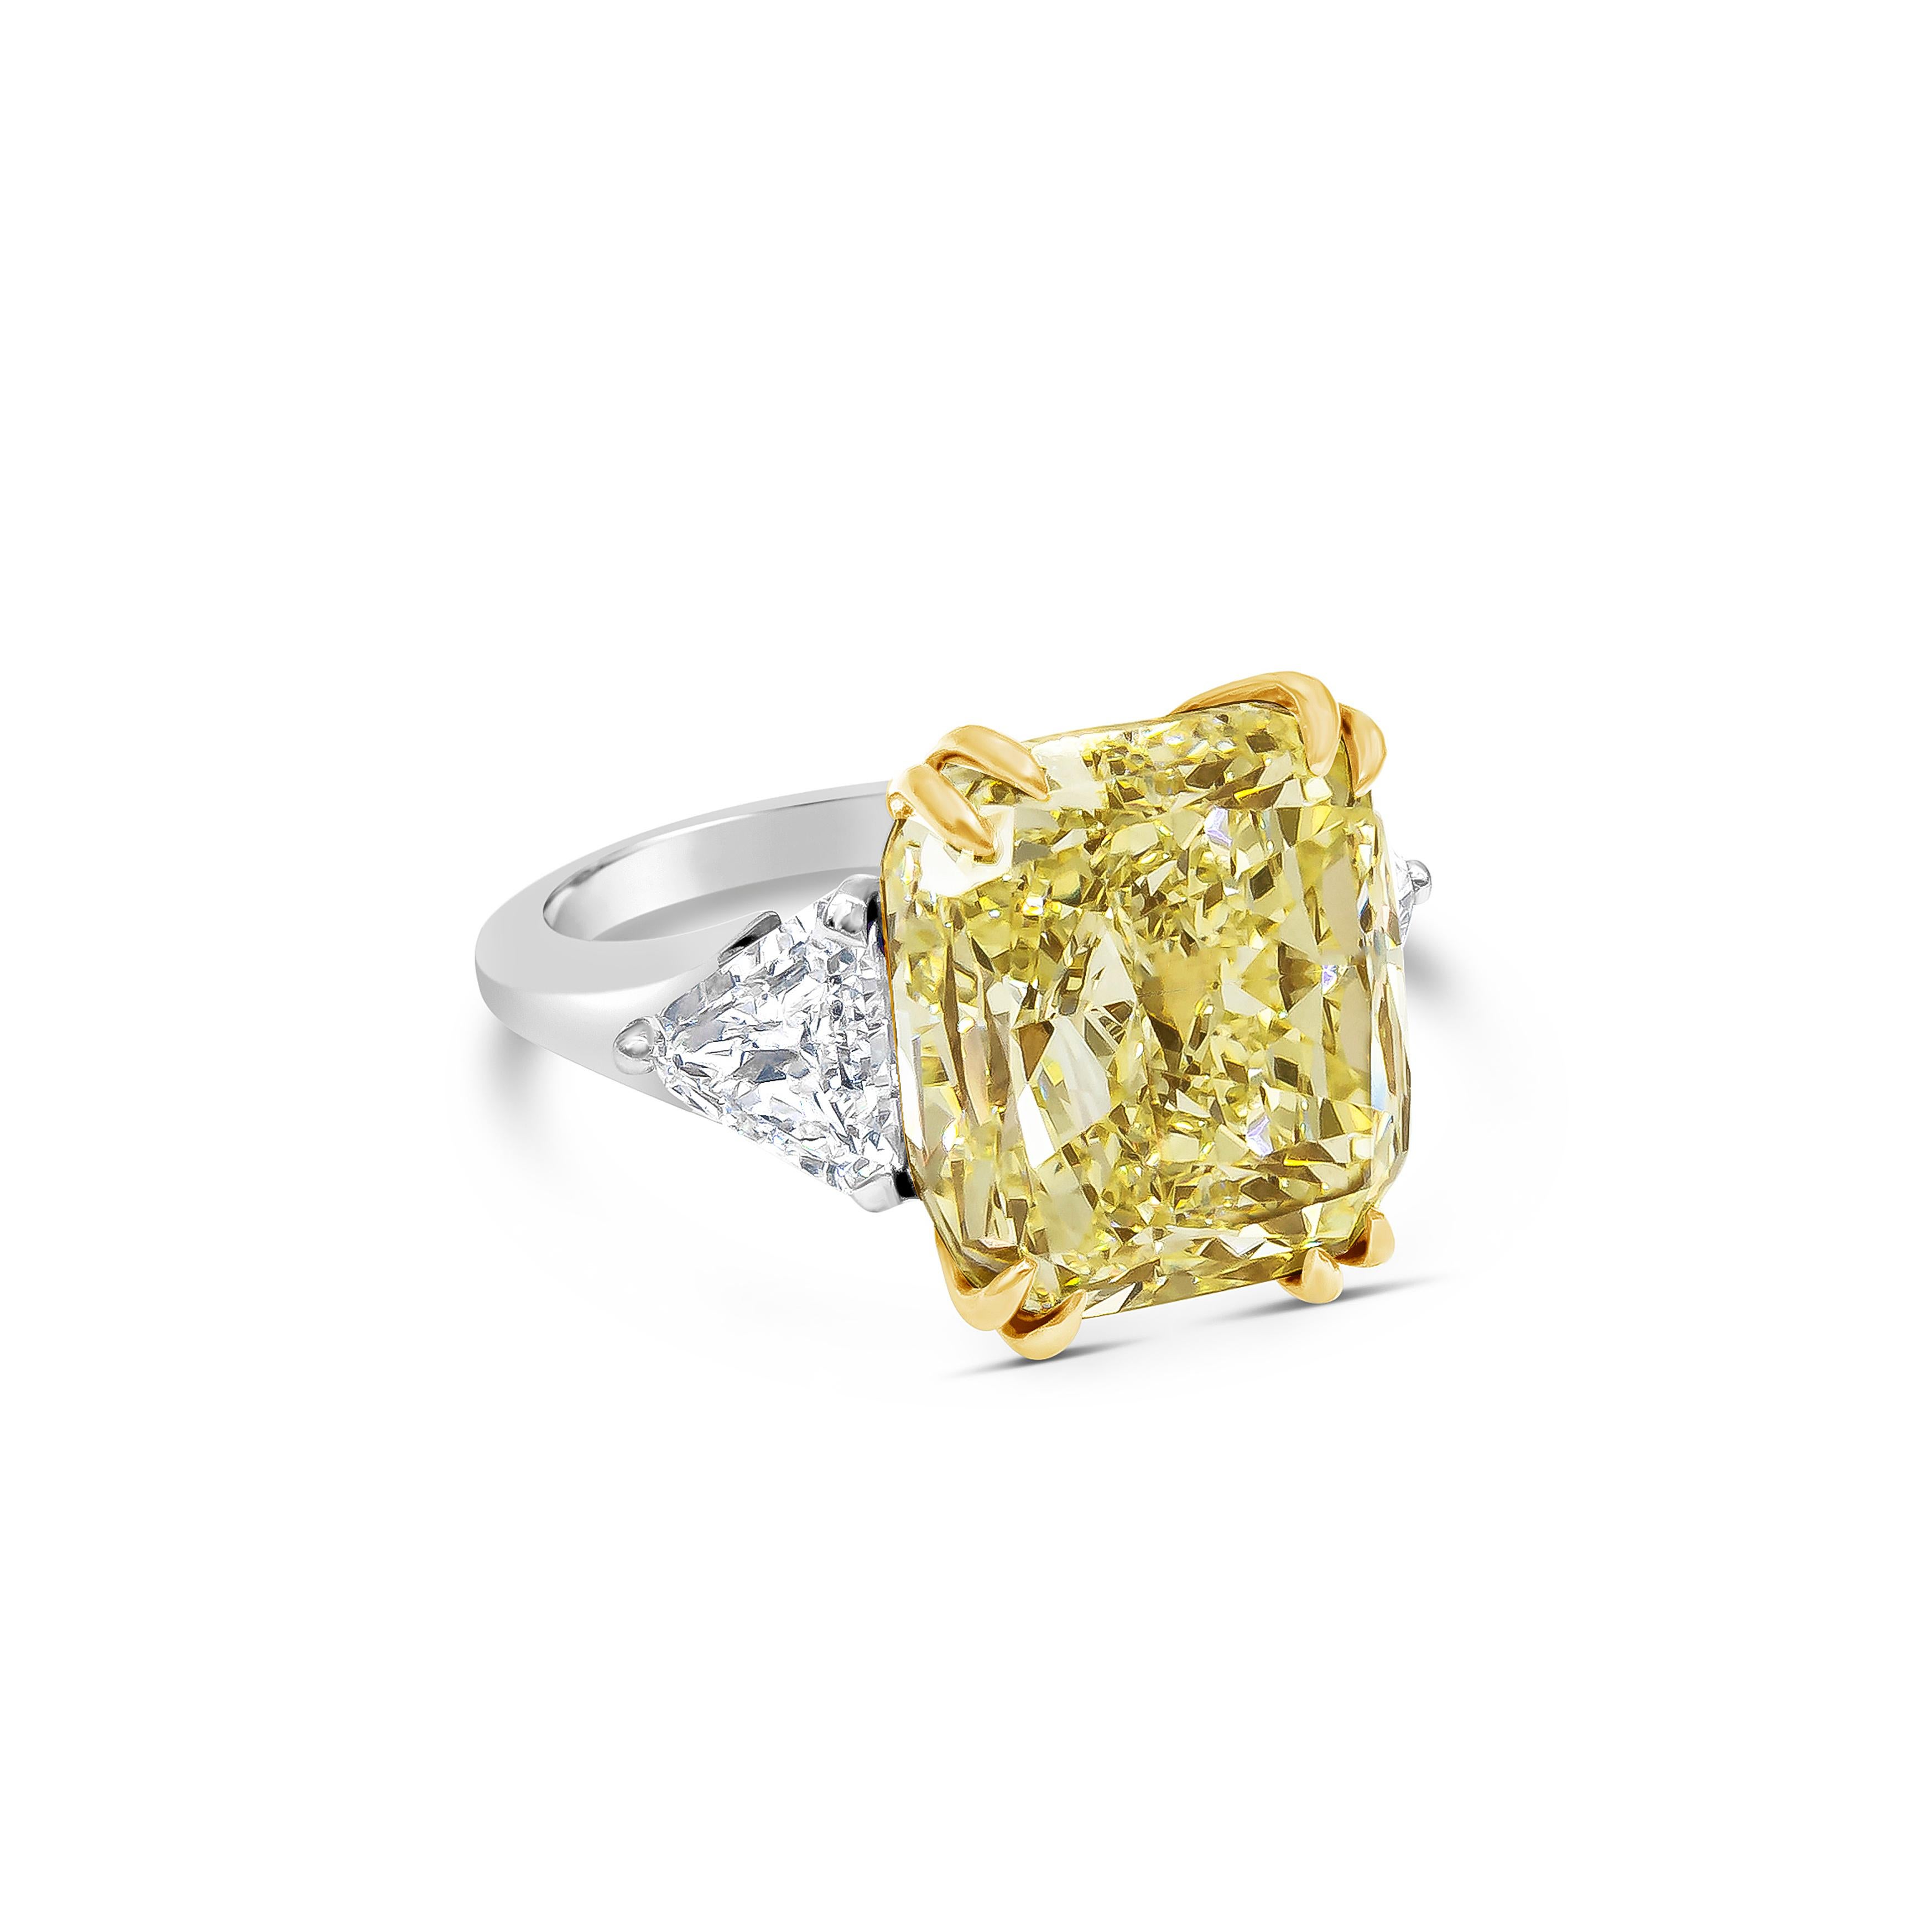 Well crafted high end engagement ring showcasing a GIA certified color-rich fancy light yellow color 12.15 carat cushion cut diamond, VS2 in clarity, set in an eight prong 18k yellow gold basket. Accented with trillion diamonds on each side weighing